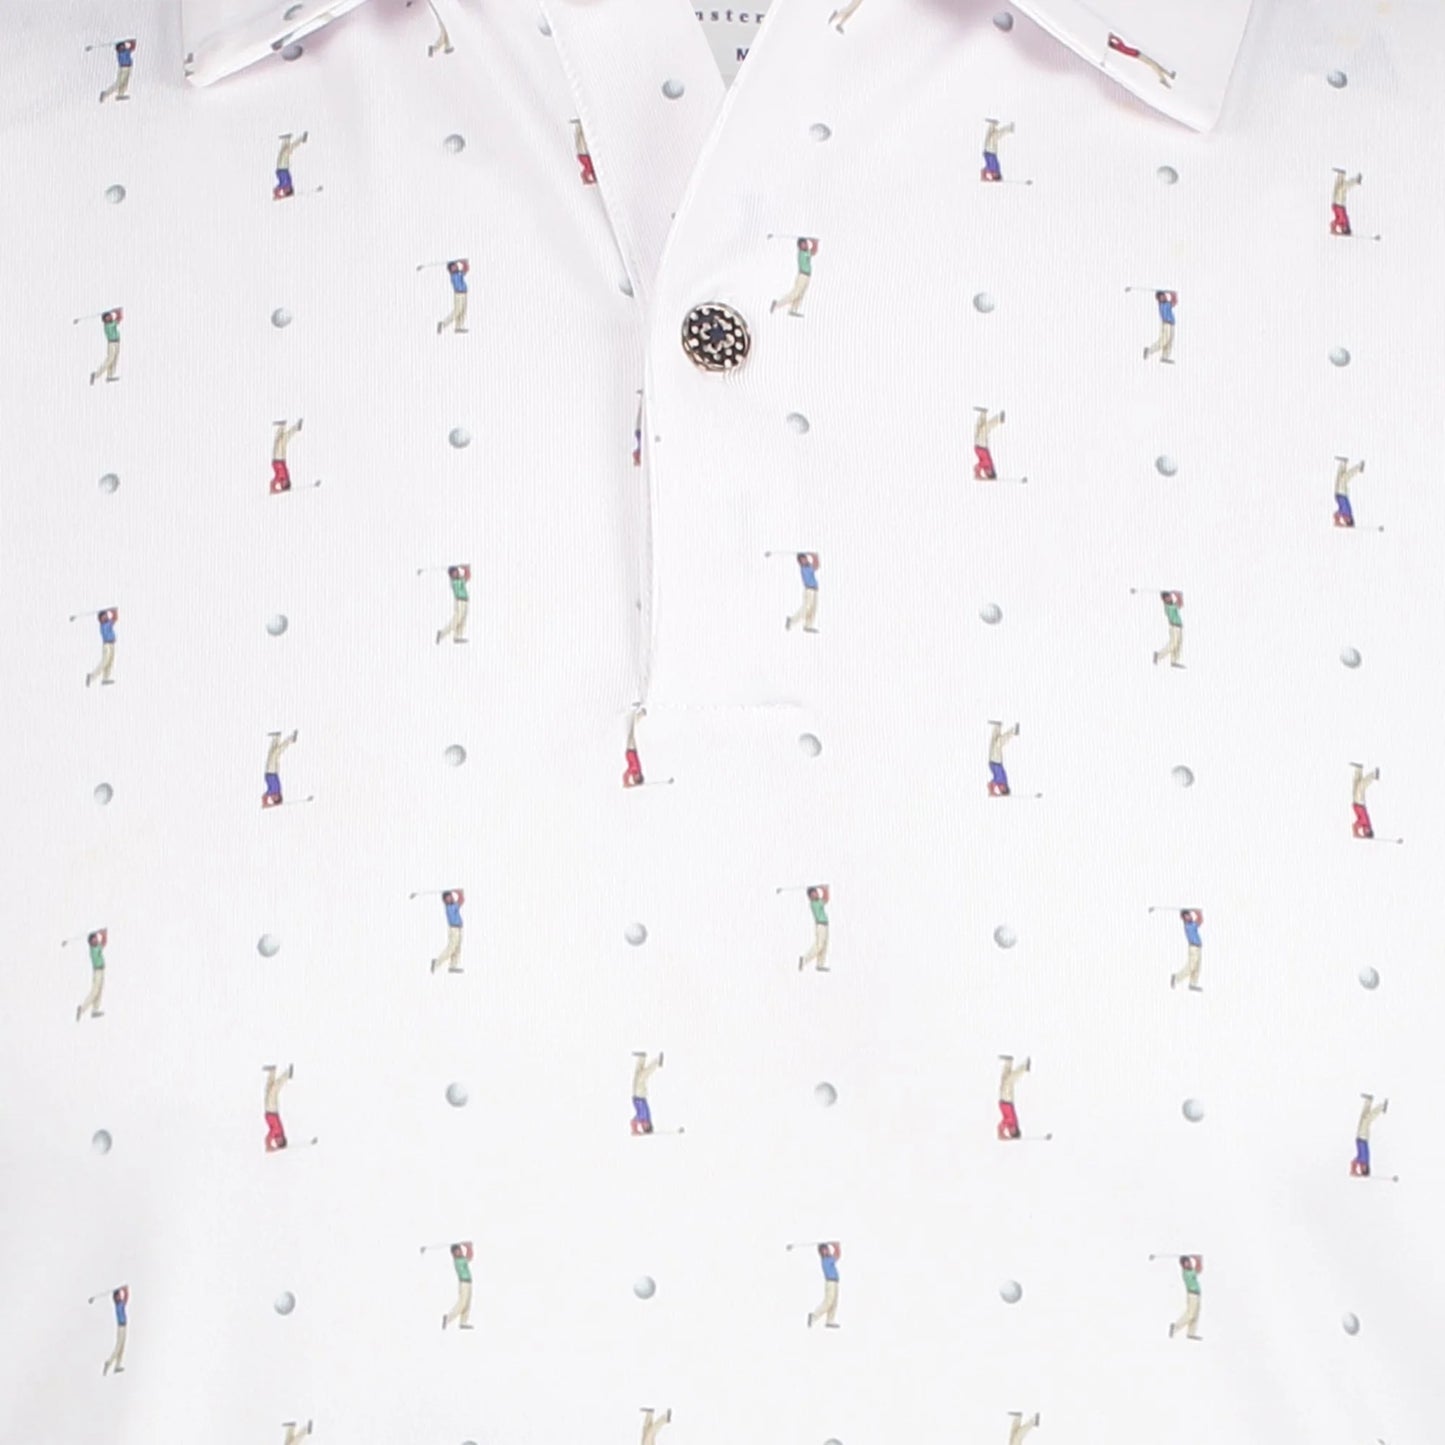 Golfers polo in white by R2